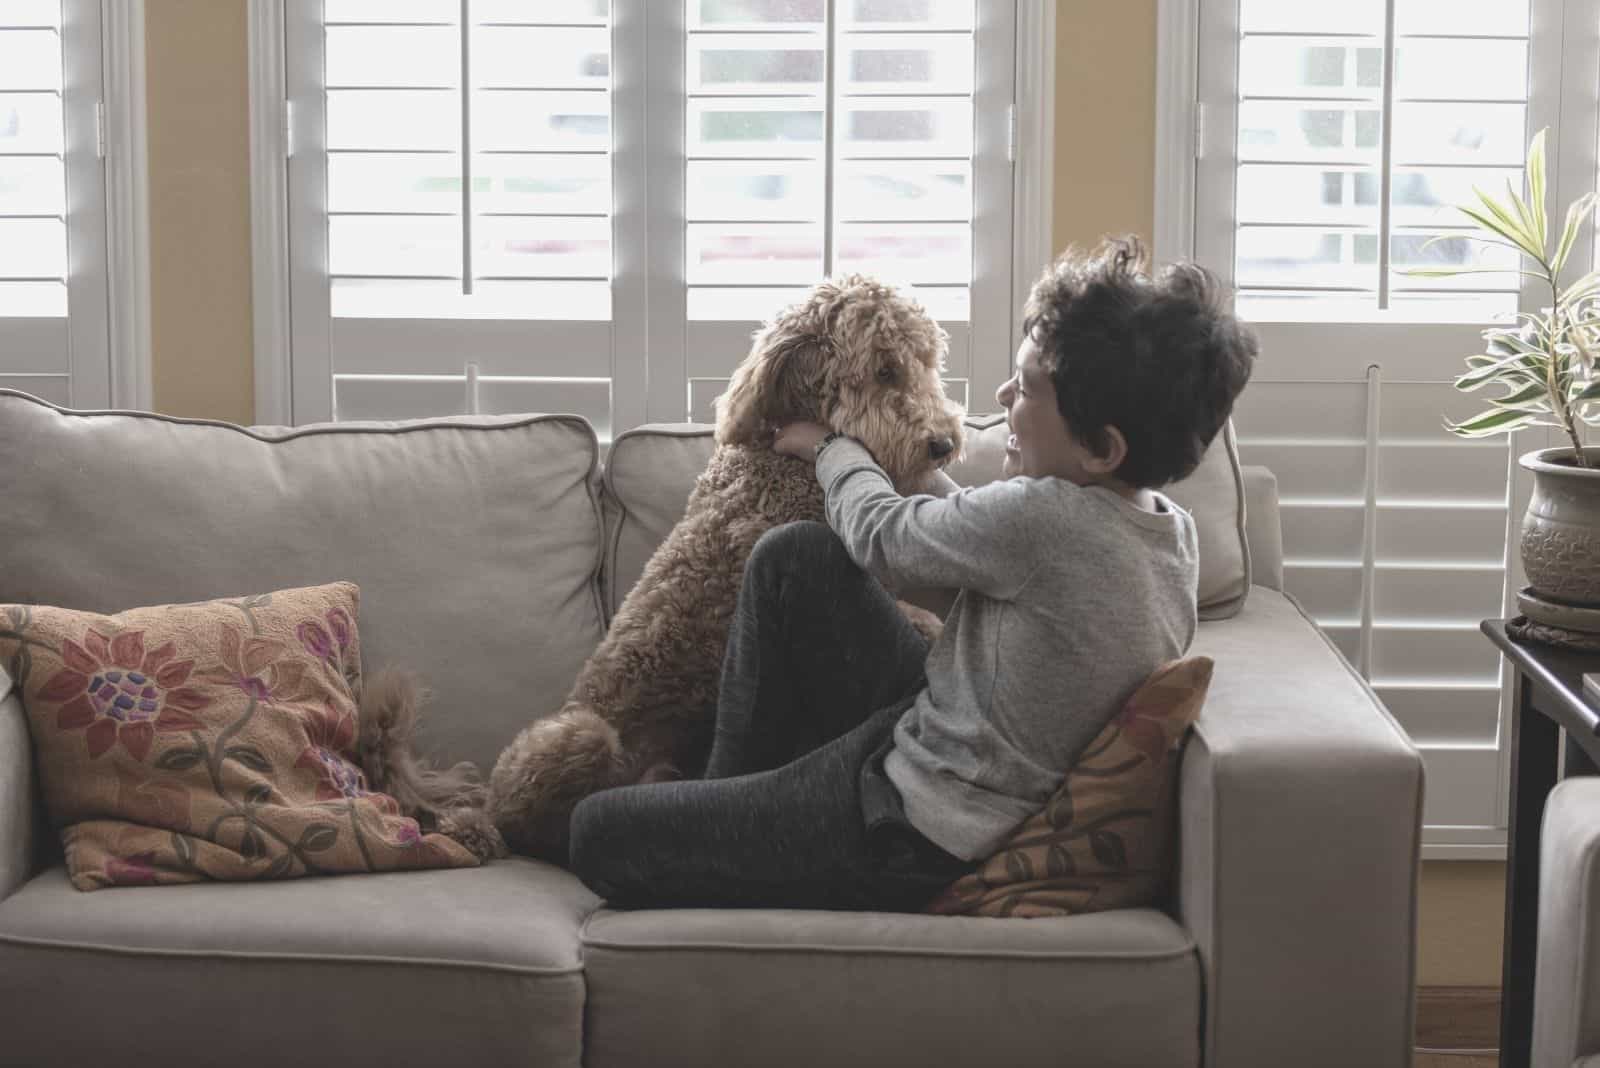 8 year old boy playing with a goldendoodle at home at the sofa